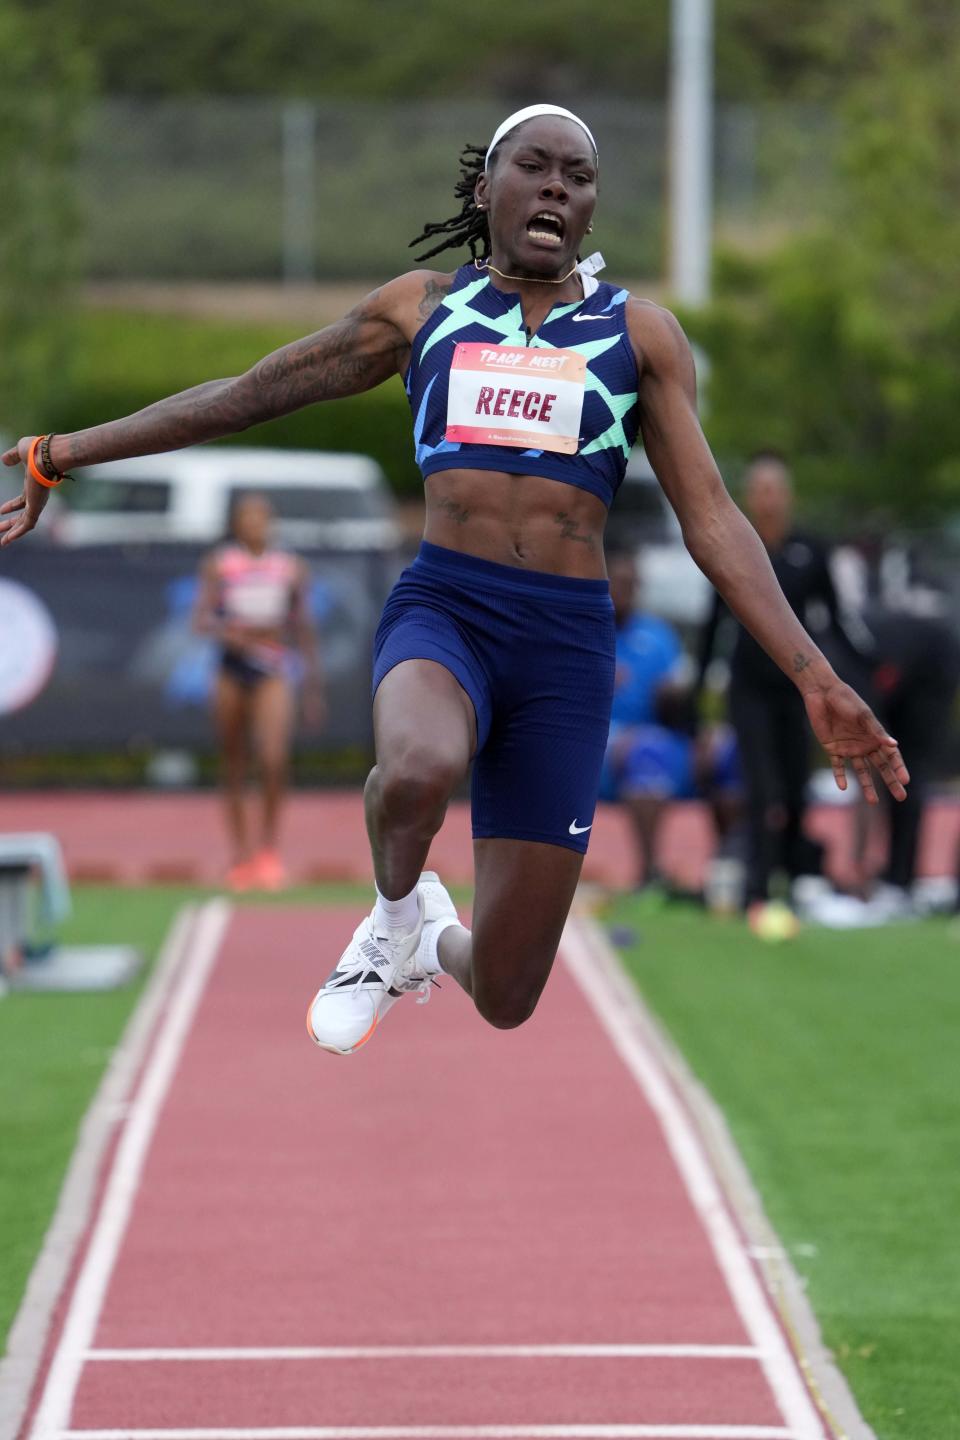 Brittney Reese, who qualified for her fourth Olympics in June, won gold in the long jump at the 2012 London Olympics, then took the silver at the Rio Games.